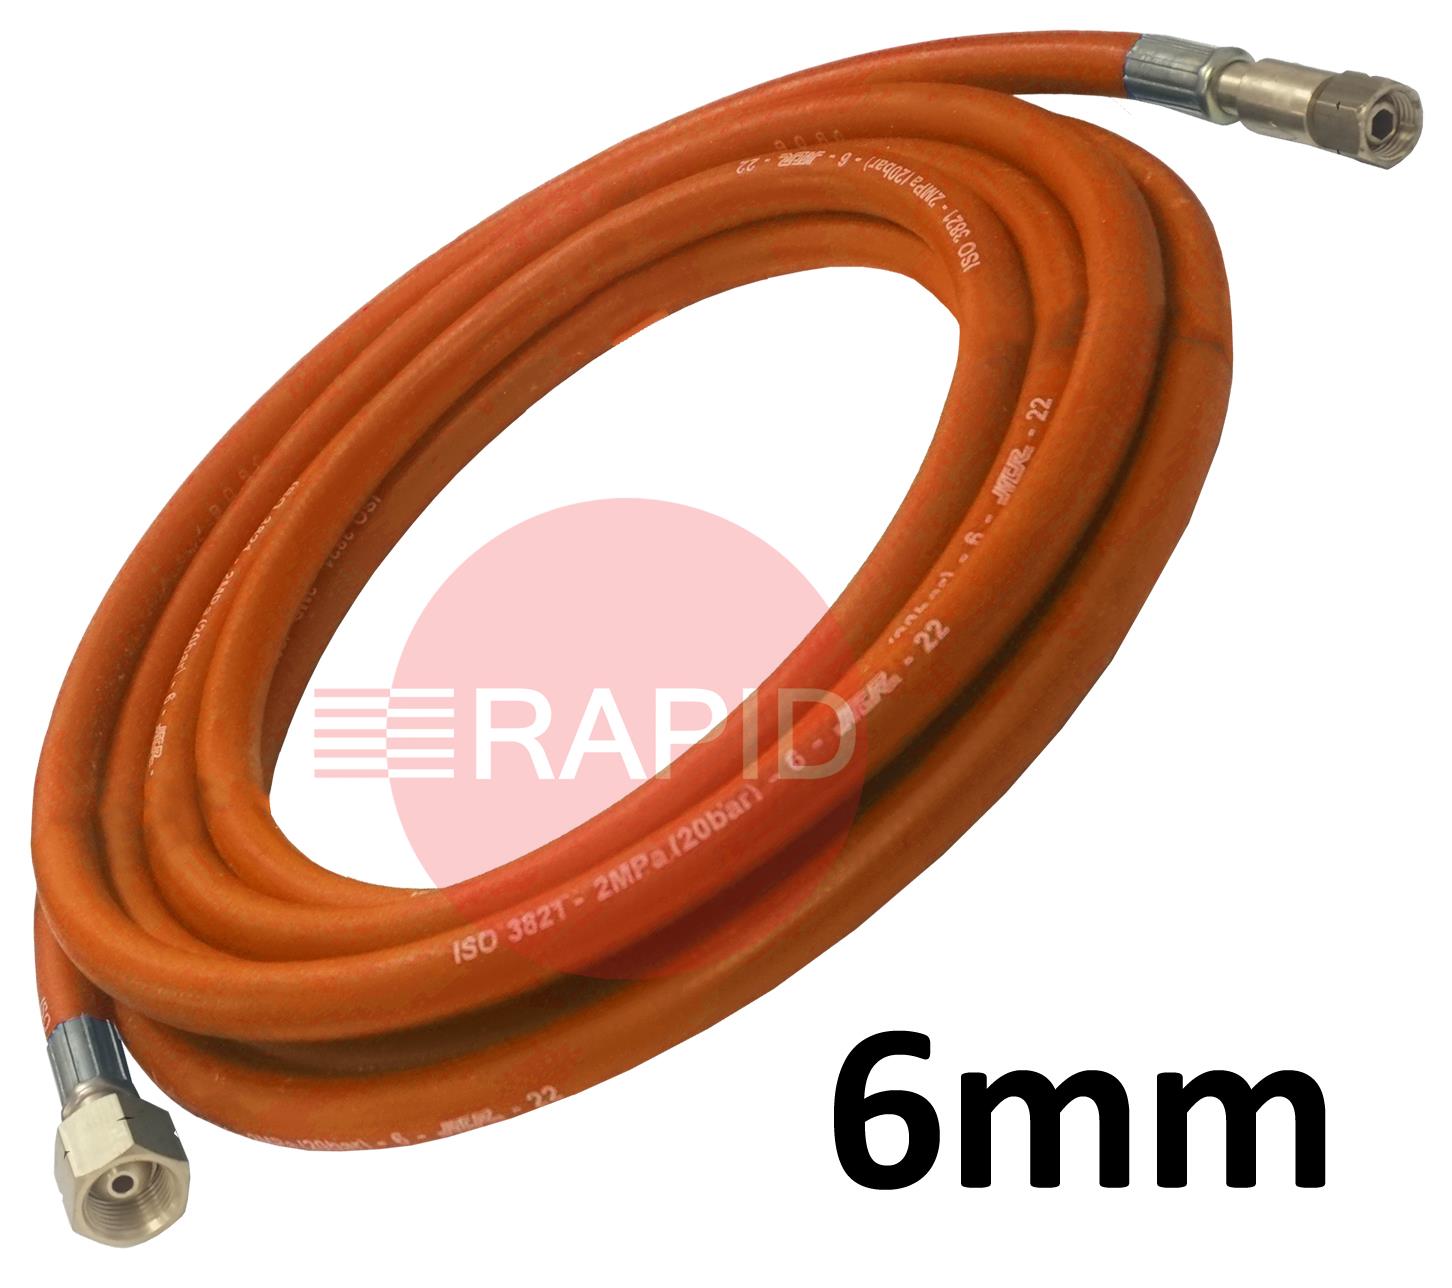 A5139  Fitted Propane Hose. 6mm Bore. G1/4 Check Valve & G3/8 Regulator Connection - 20m